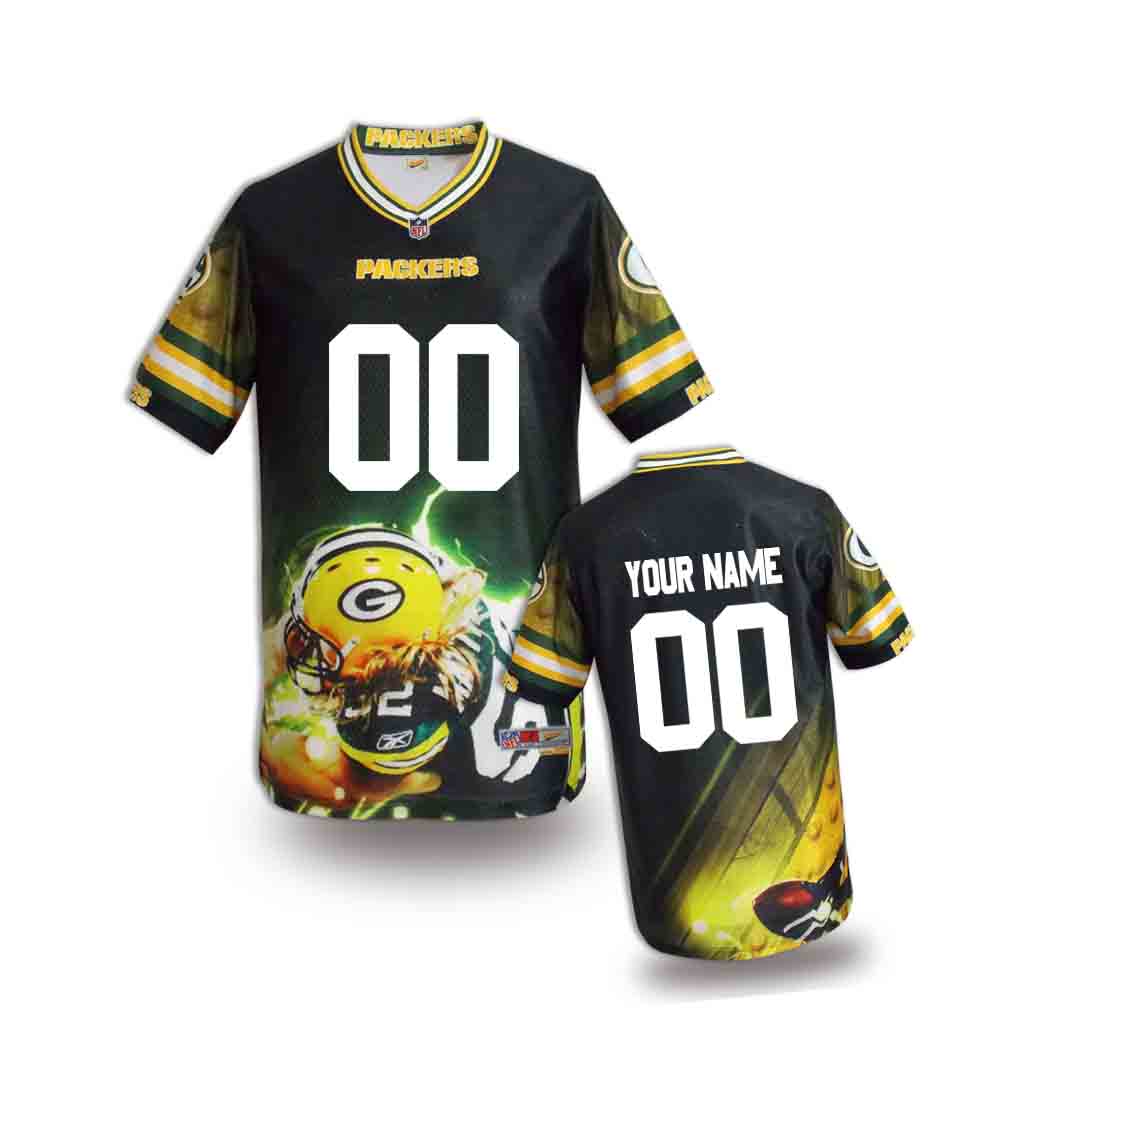 Nike Packers Customized Fashion Stitched Youth Jerseys05 - Click Image to Close